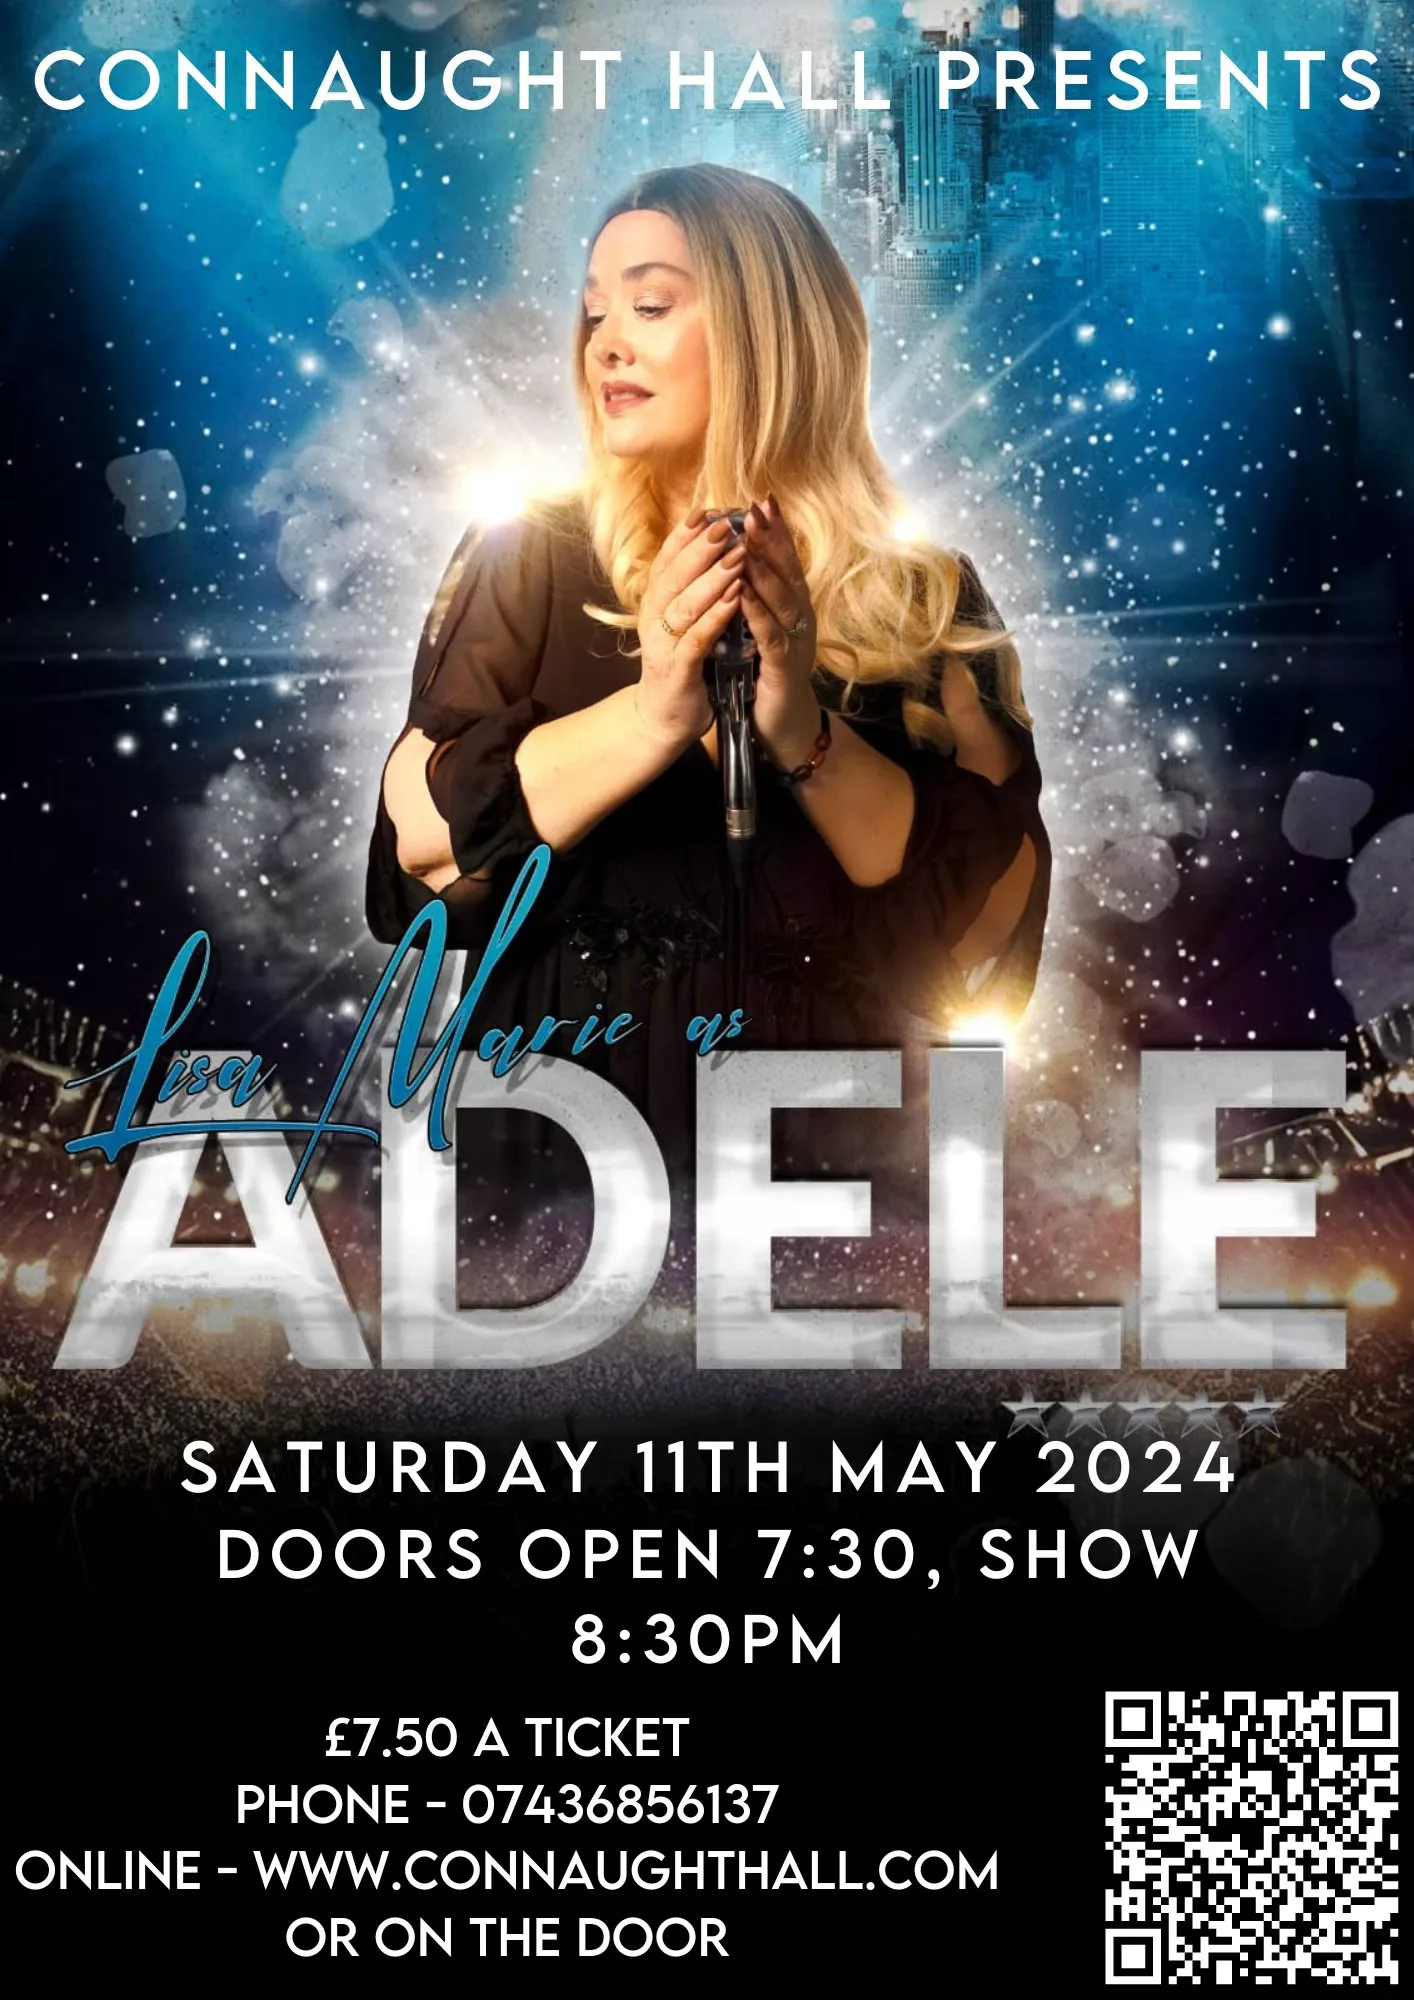 Live Performance : Lisa Marie, Adele Tribute – Connaught Hall, Attleborough, 11th May